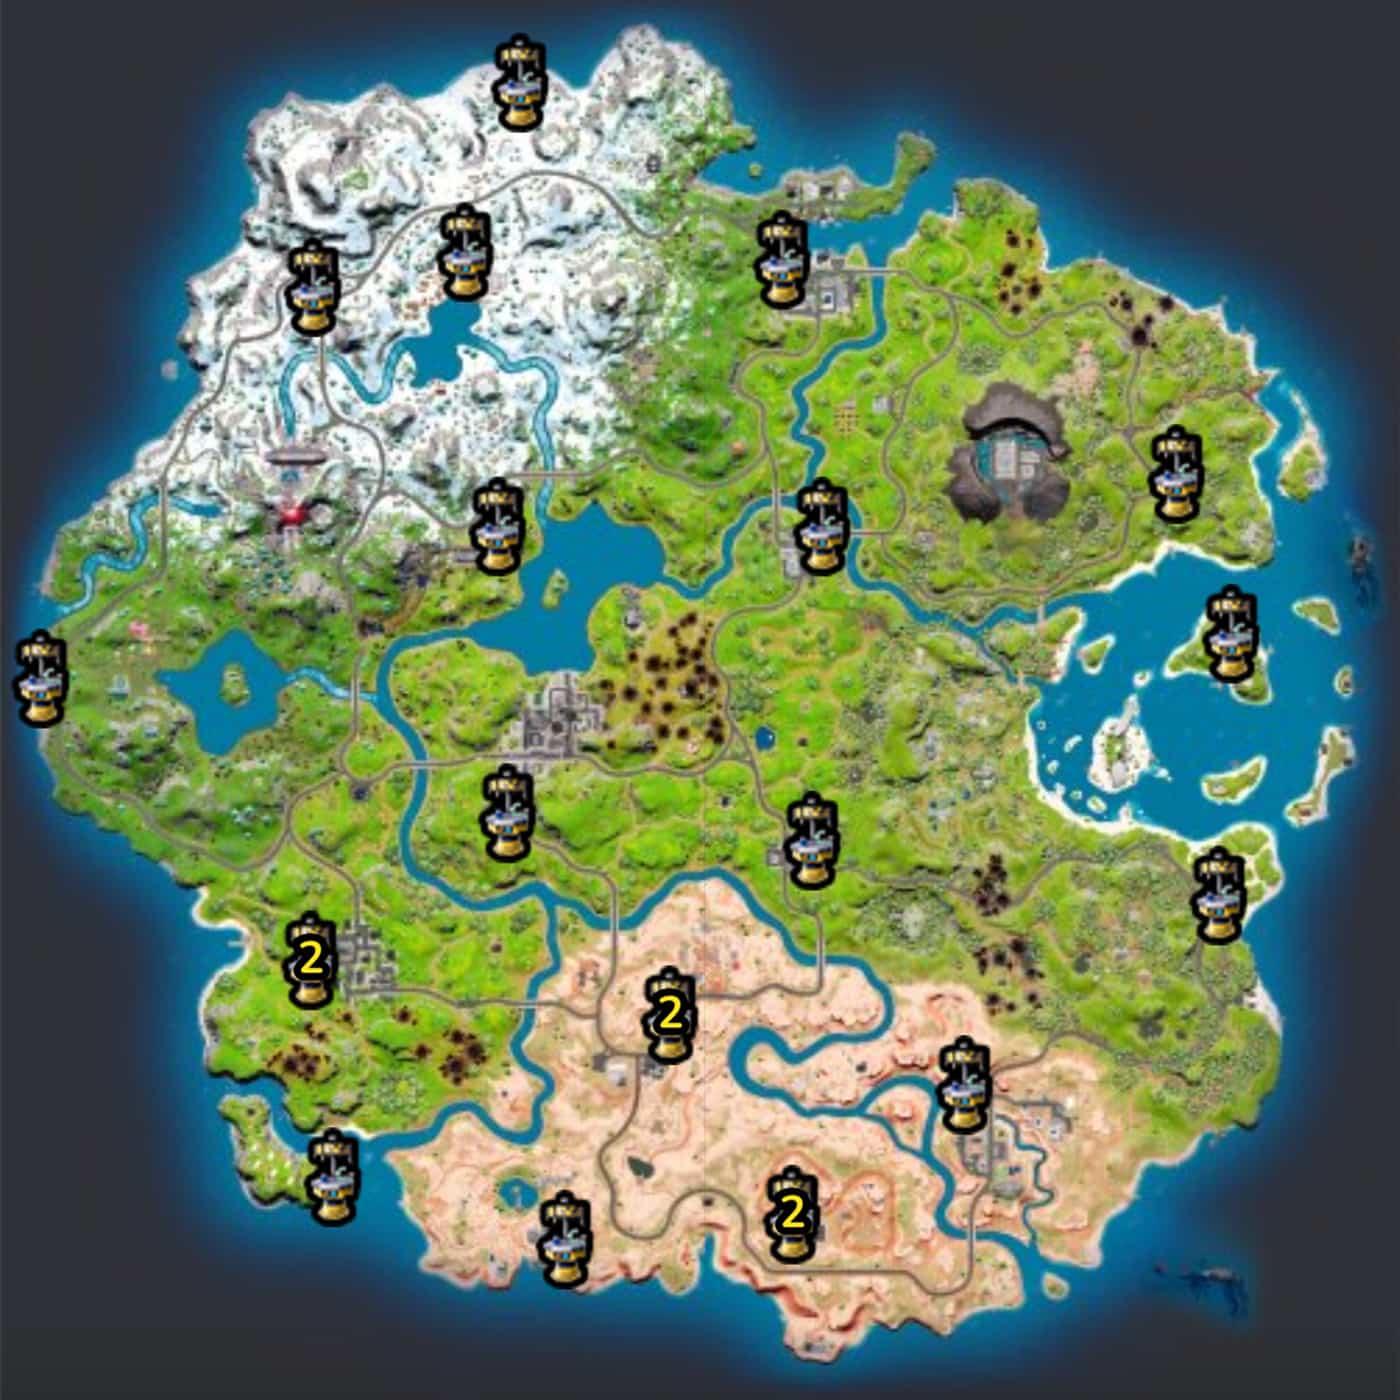 Upgrade Bench locations on the Fortnite map